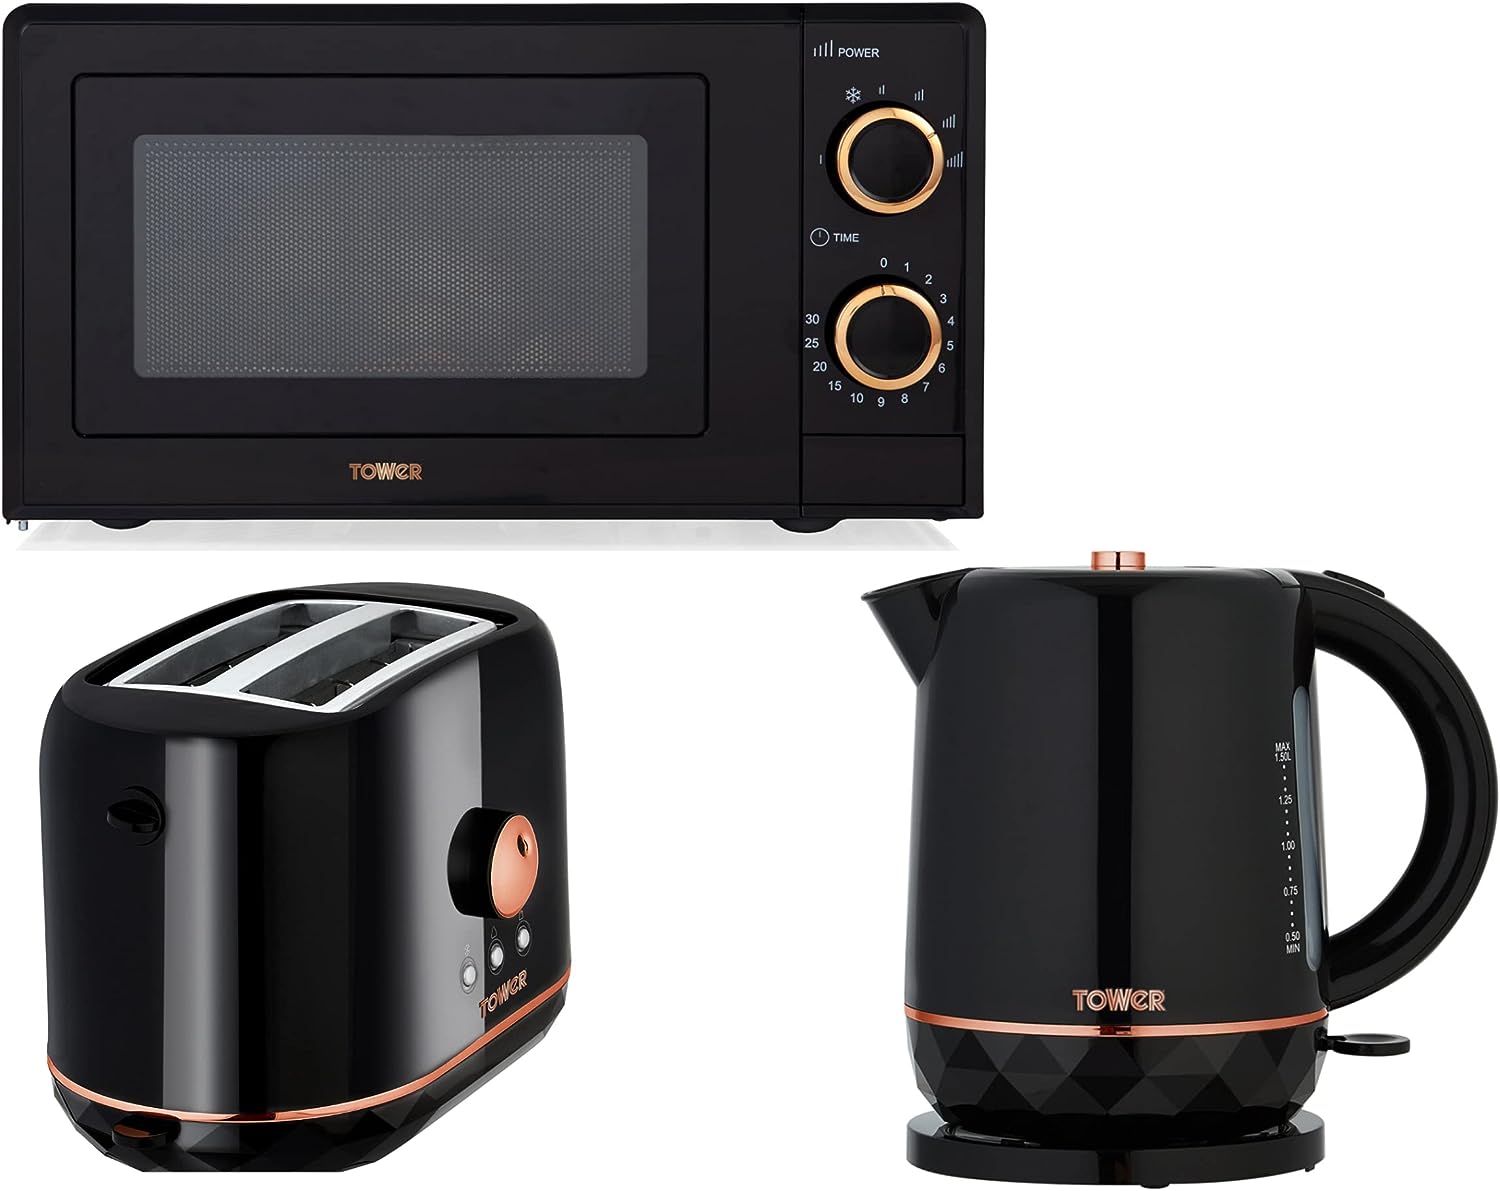 TOWER Rose Gold & Black 1.5L 2200W Kettle, 2 Slice 870W Toaster & 700W 20L Microwave